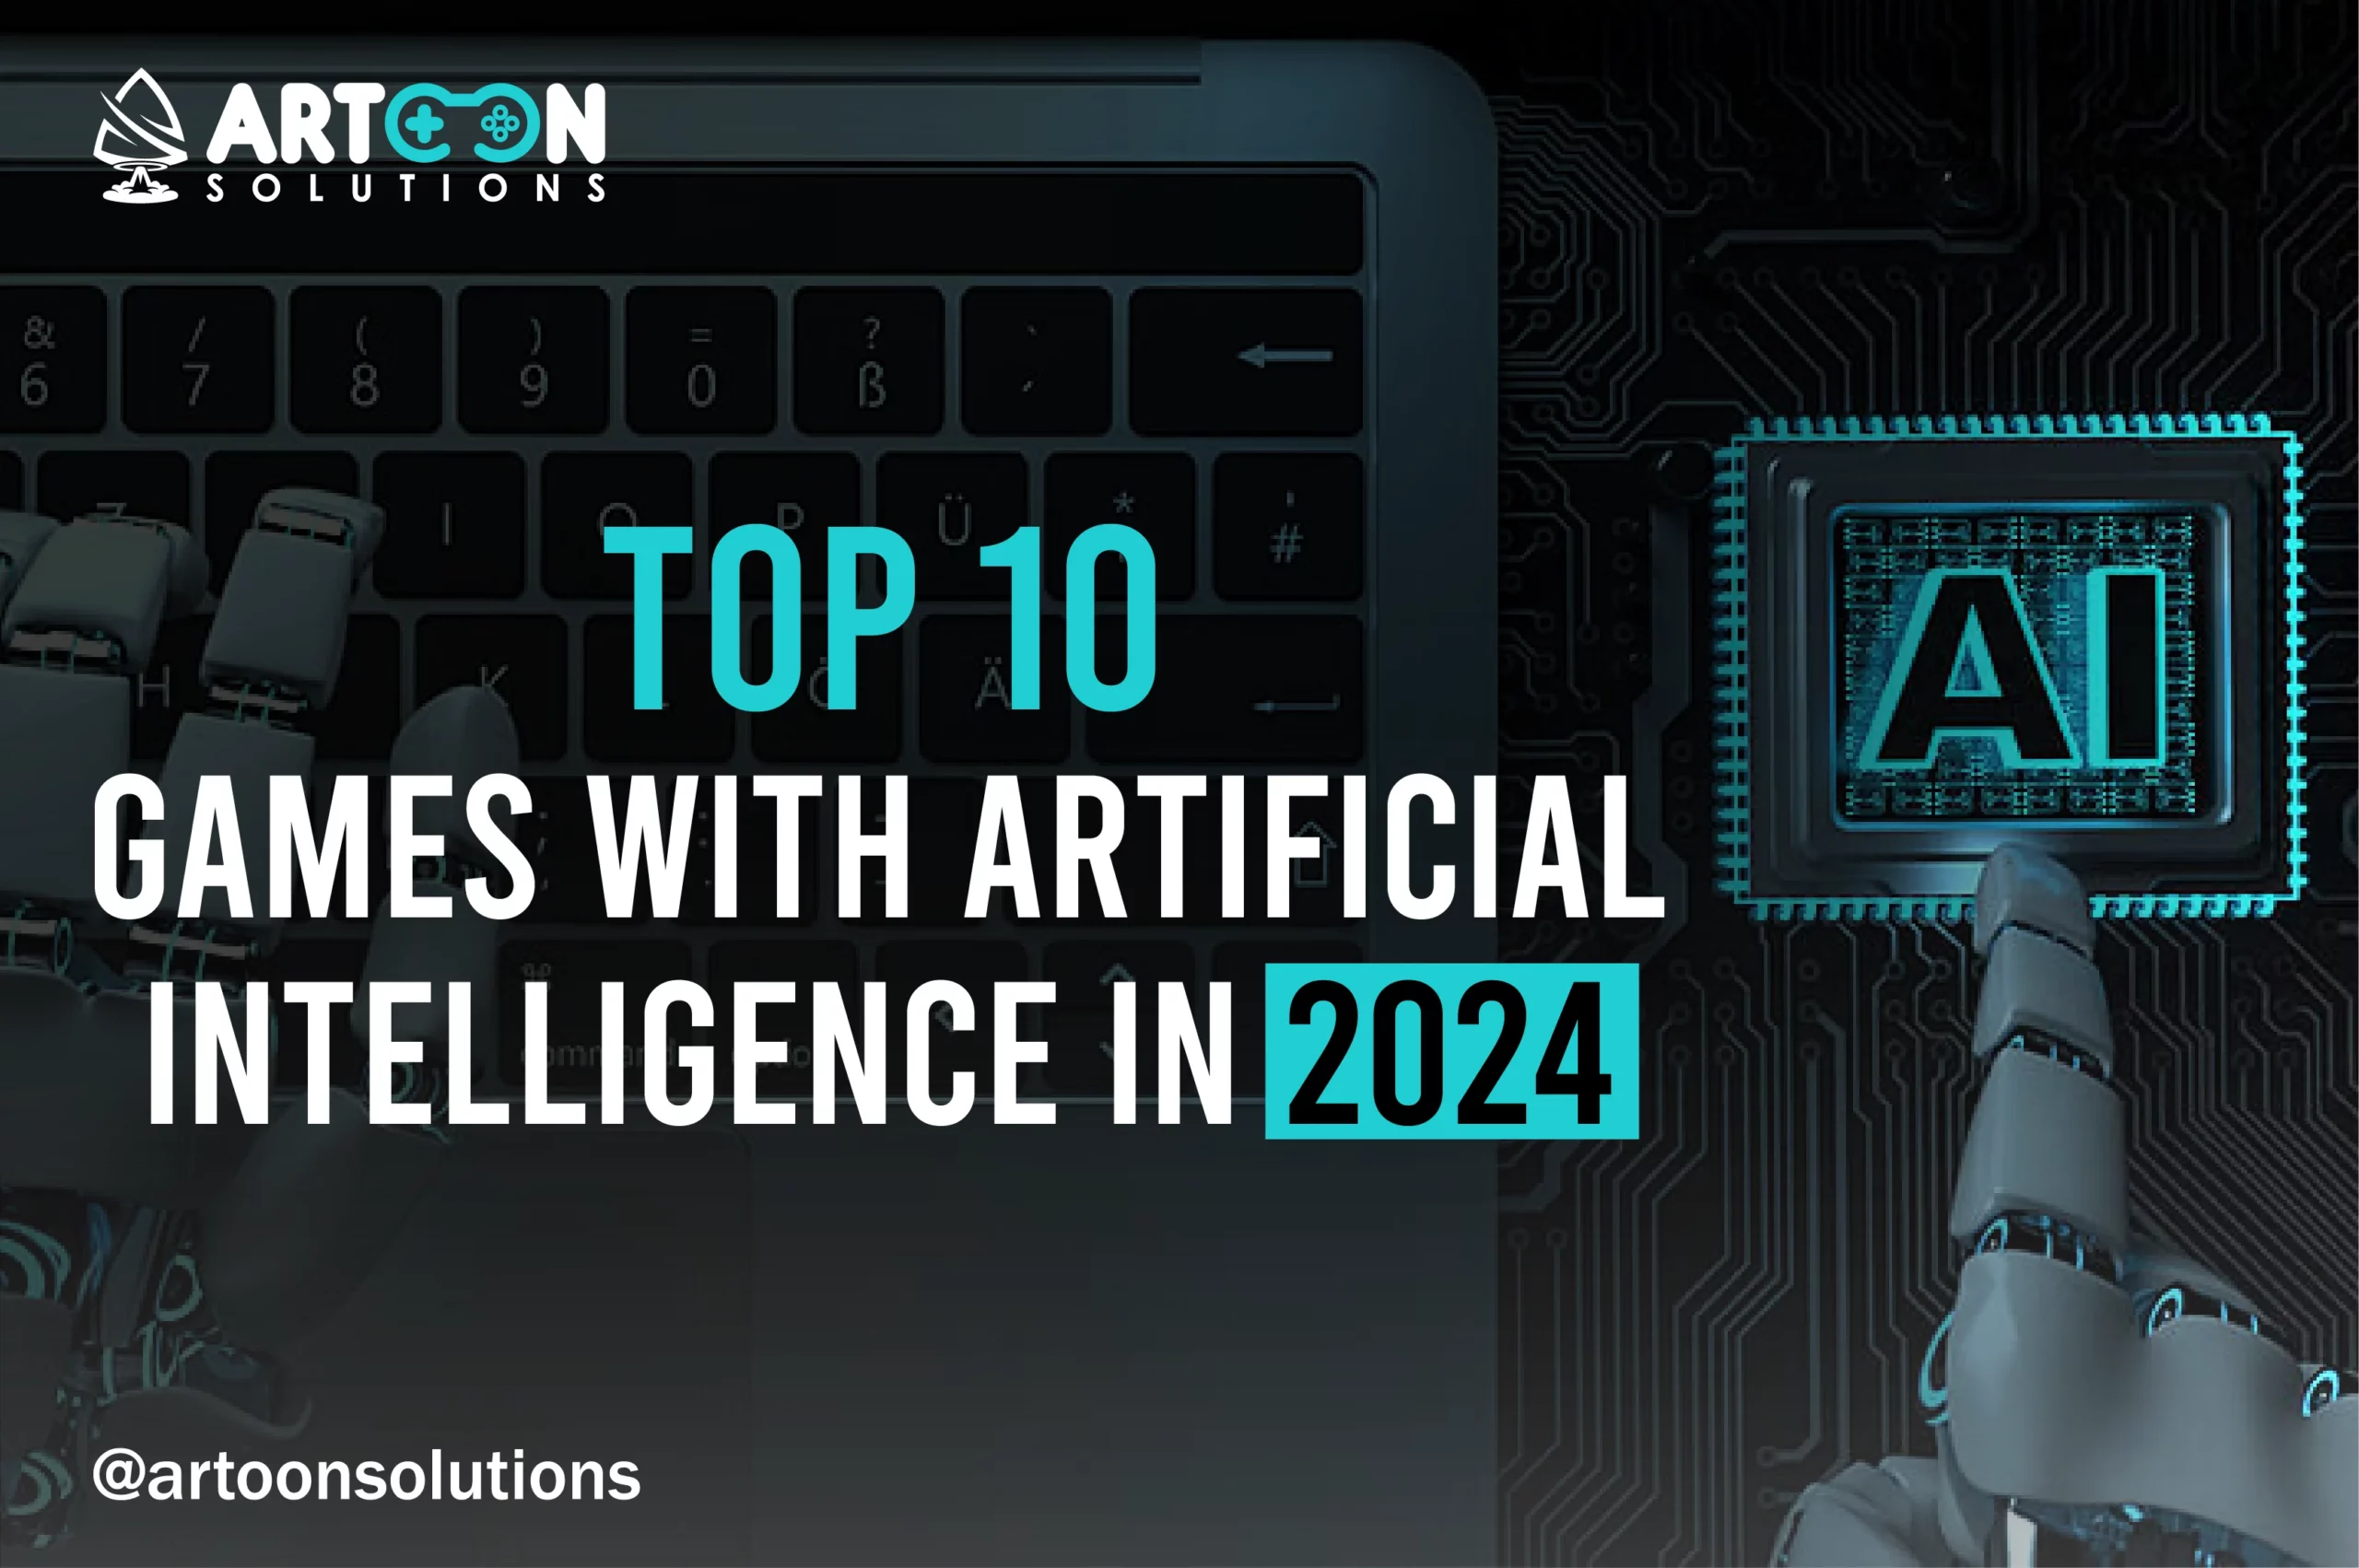 Top 10 Games with Artificial Intelligence in 2024